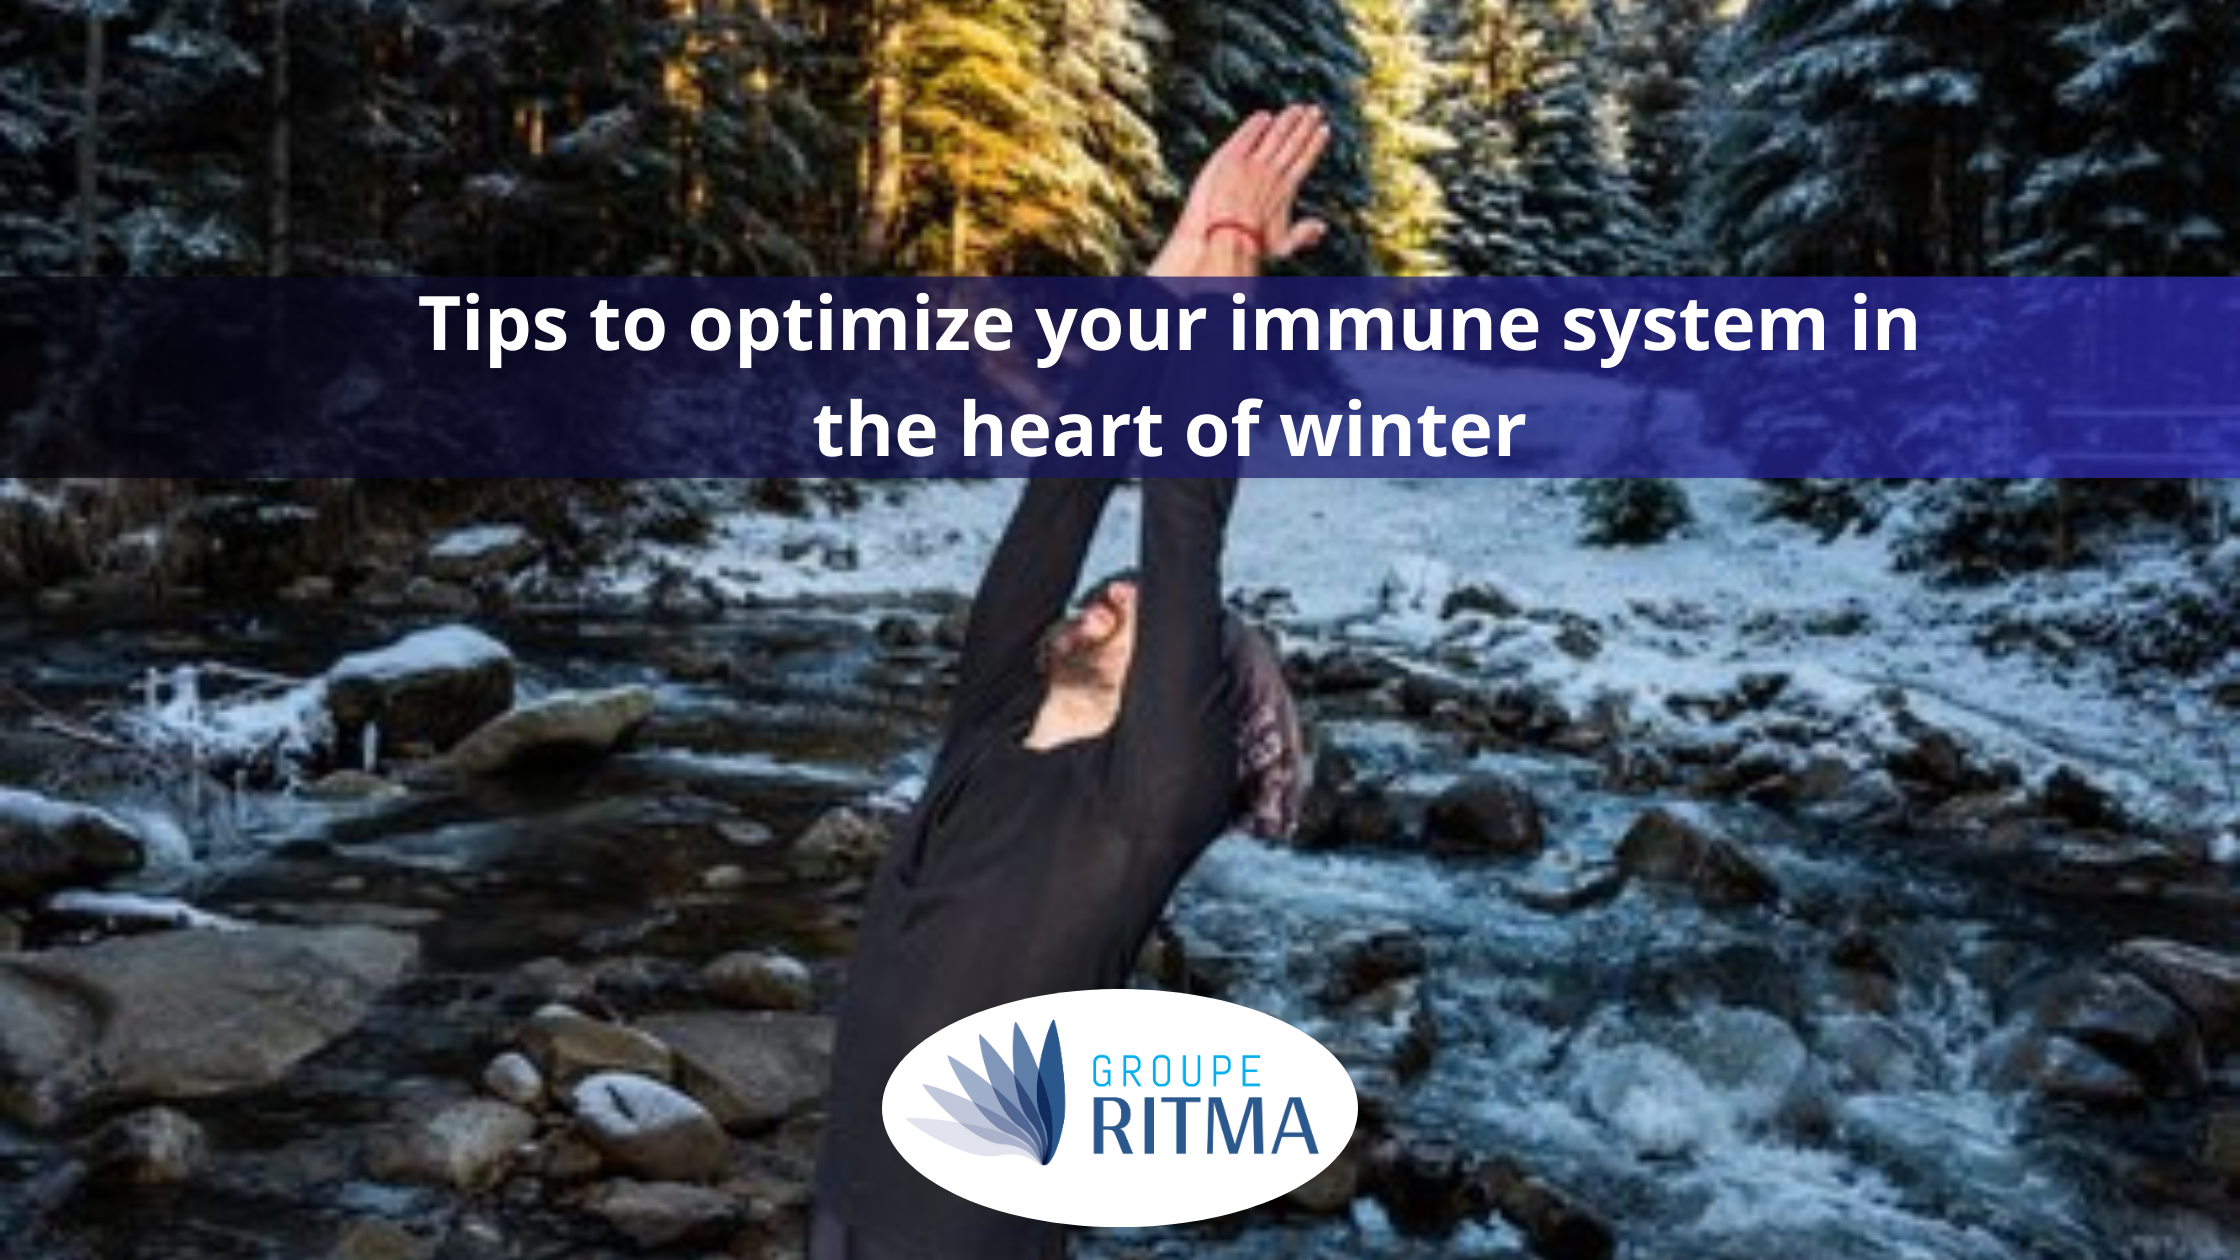 Some valuable tips to optimize your immune system in the heart of winter